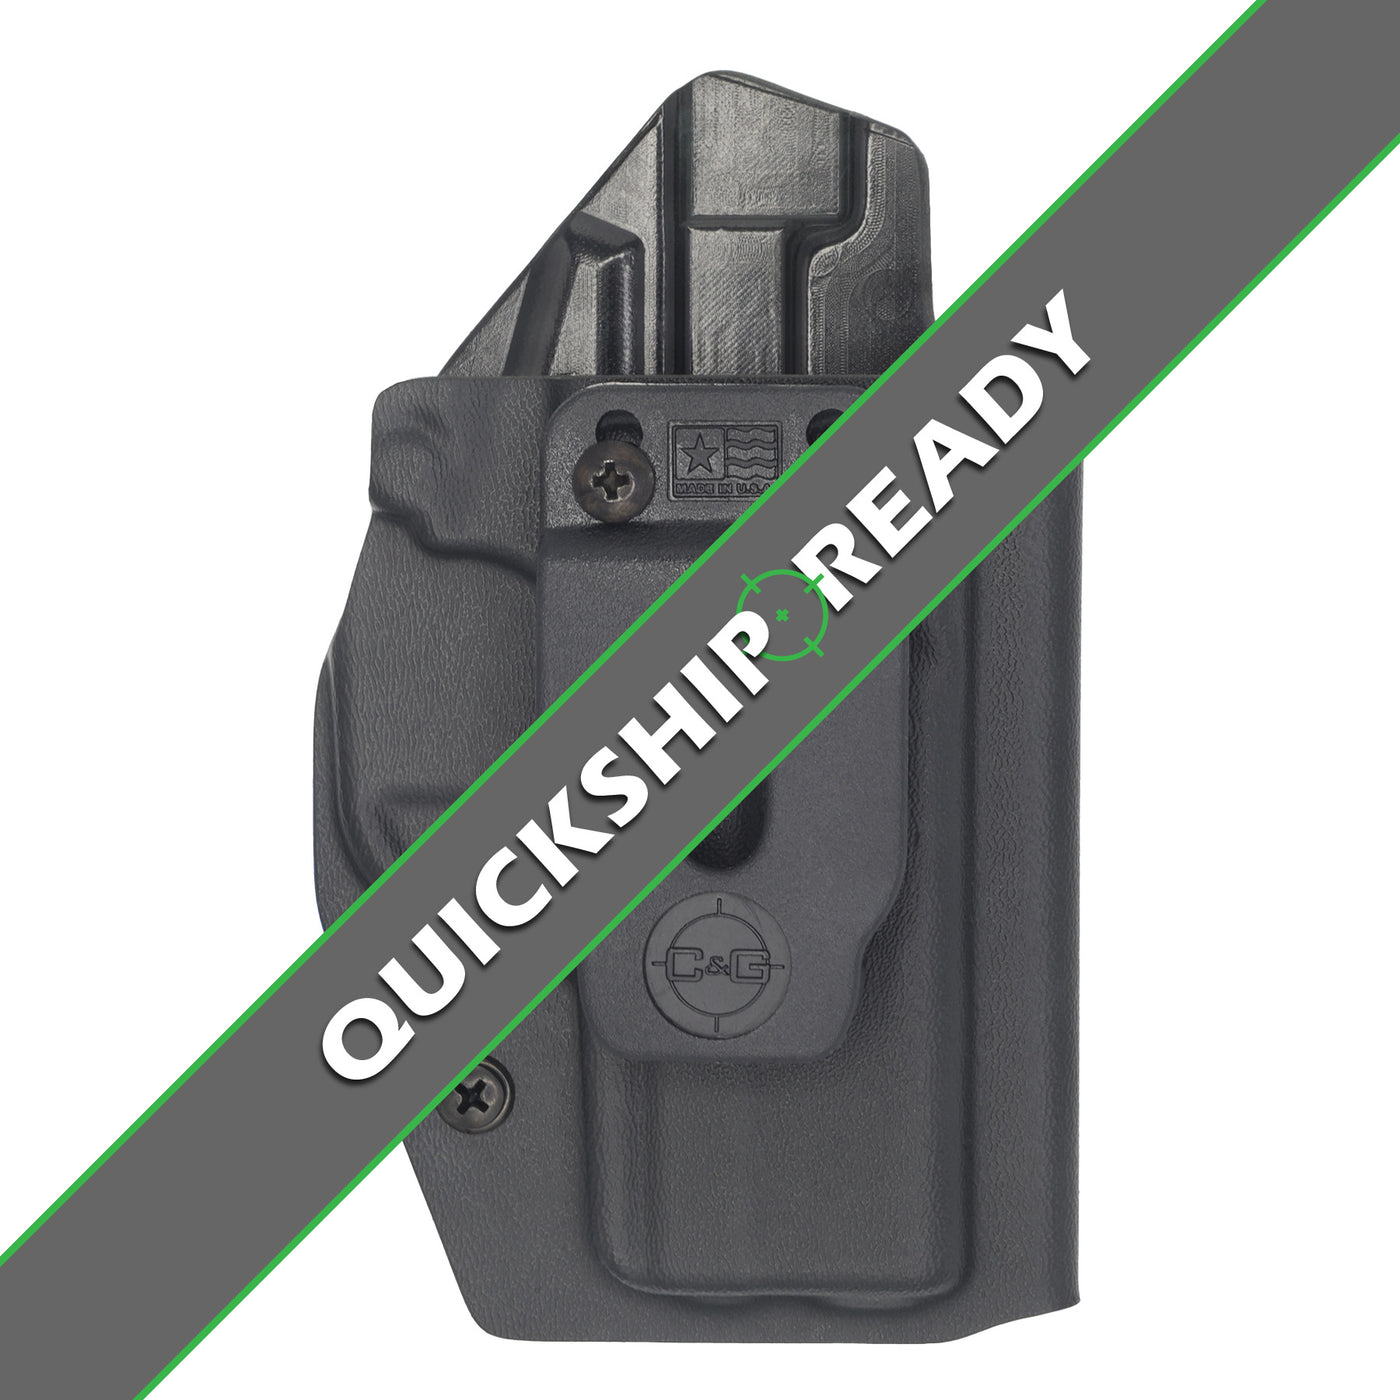 Springfield XD-E IWB Covert Kydex Holster Made by C and G Holsters. This Image is of the front of the holster showing a quickship banner.